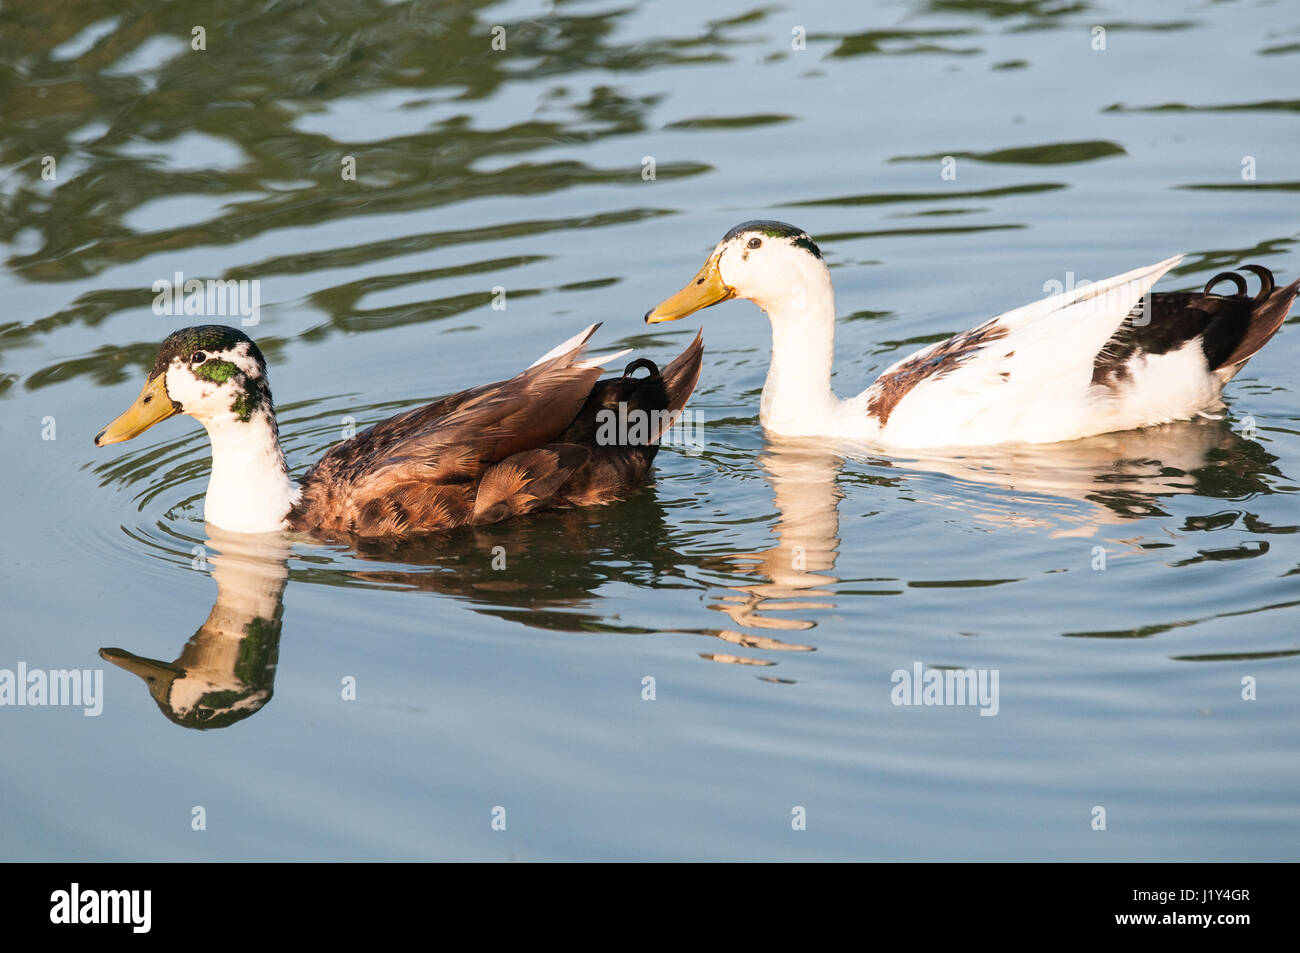 Two ducks swimming together, close-up Stock Photo